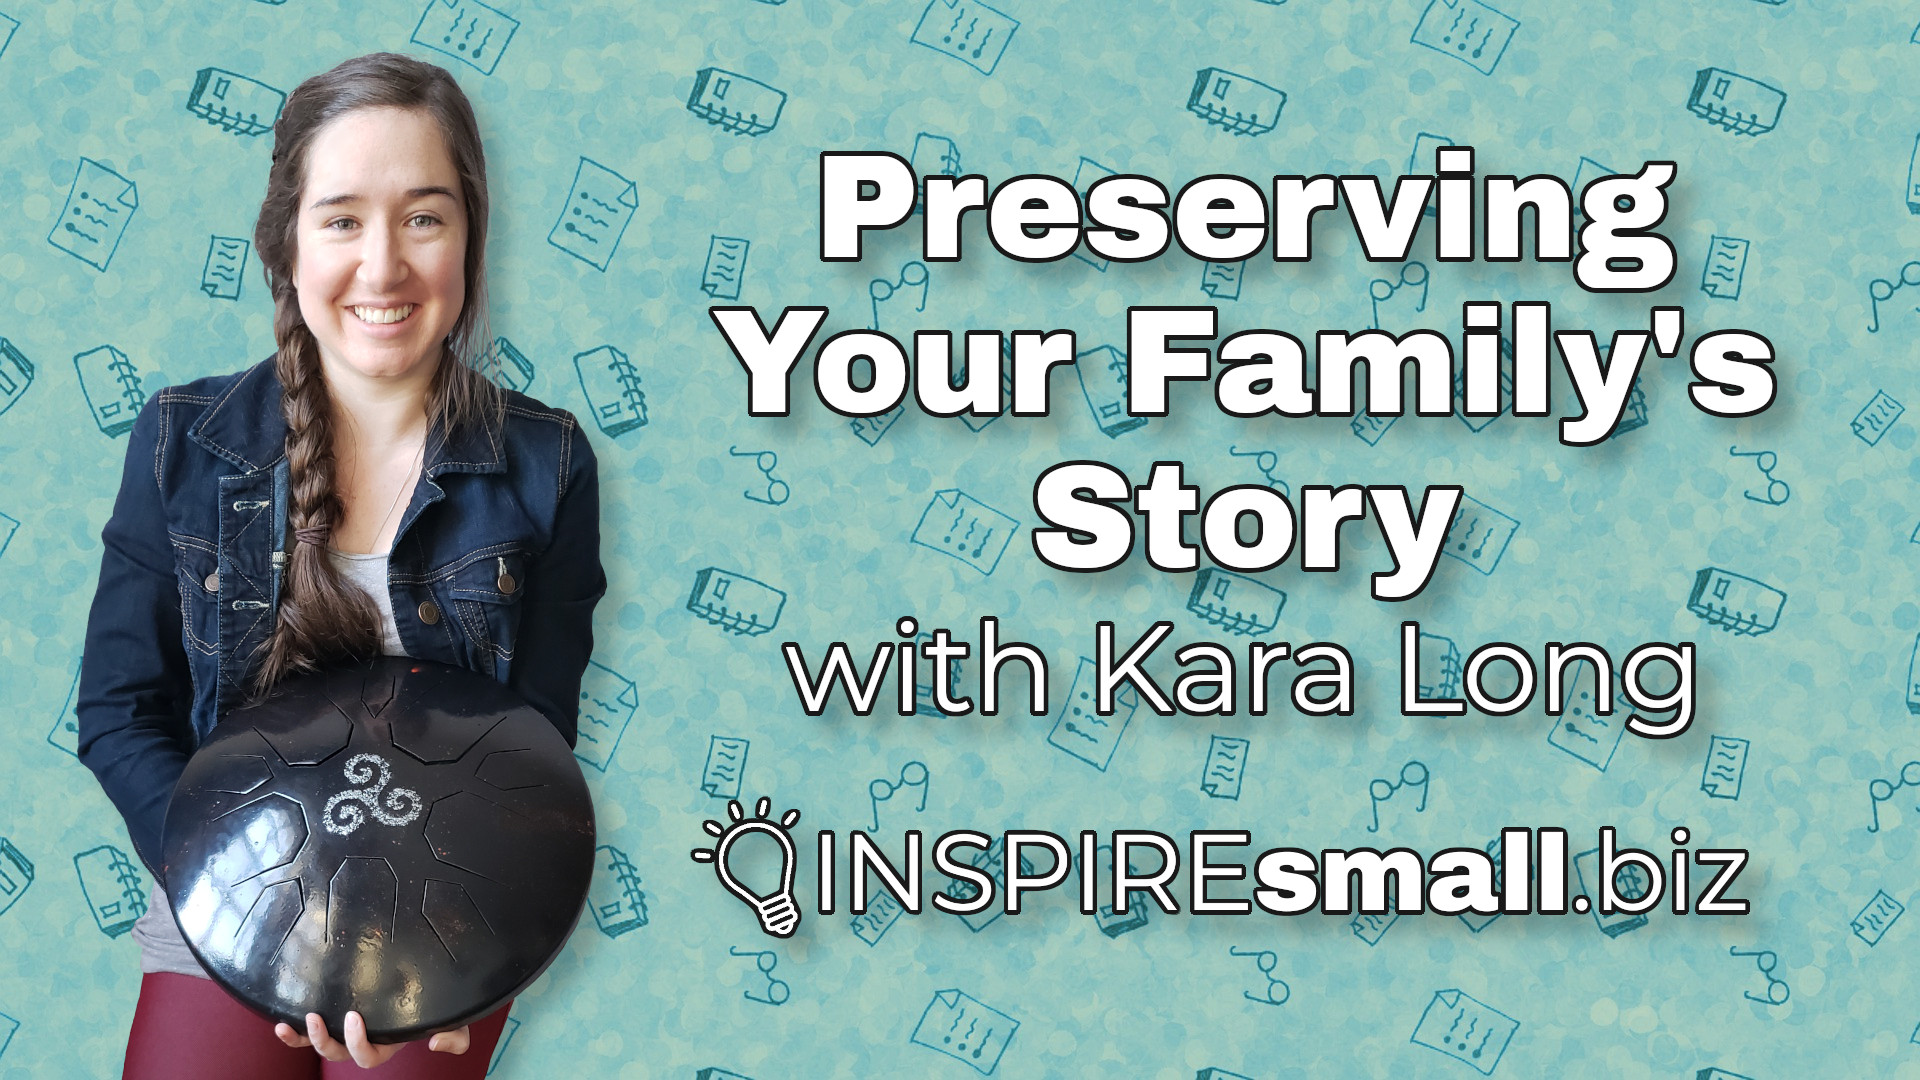 Preserving Your Family's Story with Kara Long, hosted by INSPIREsmall.biz. Image is of Kara Long holding a drum.